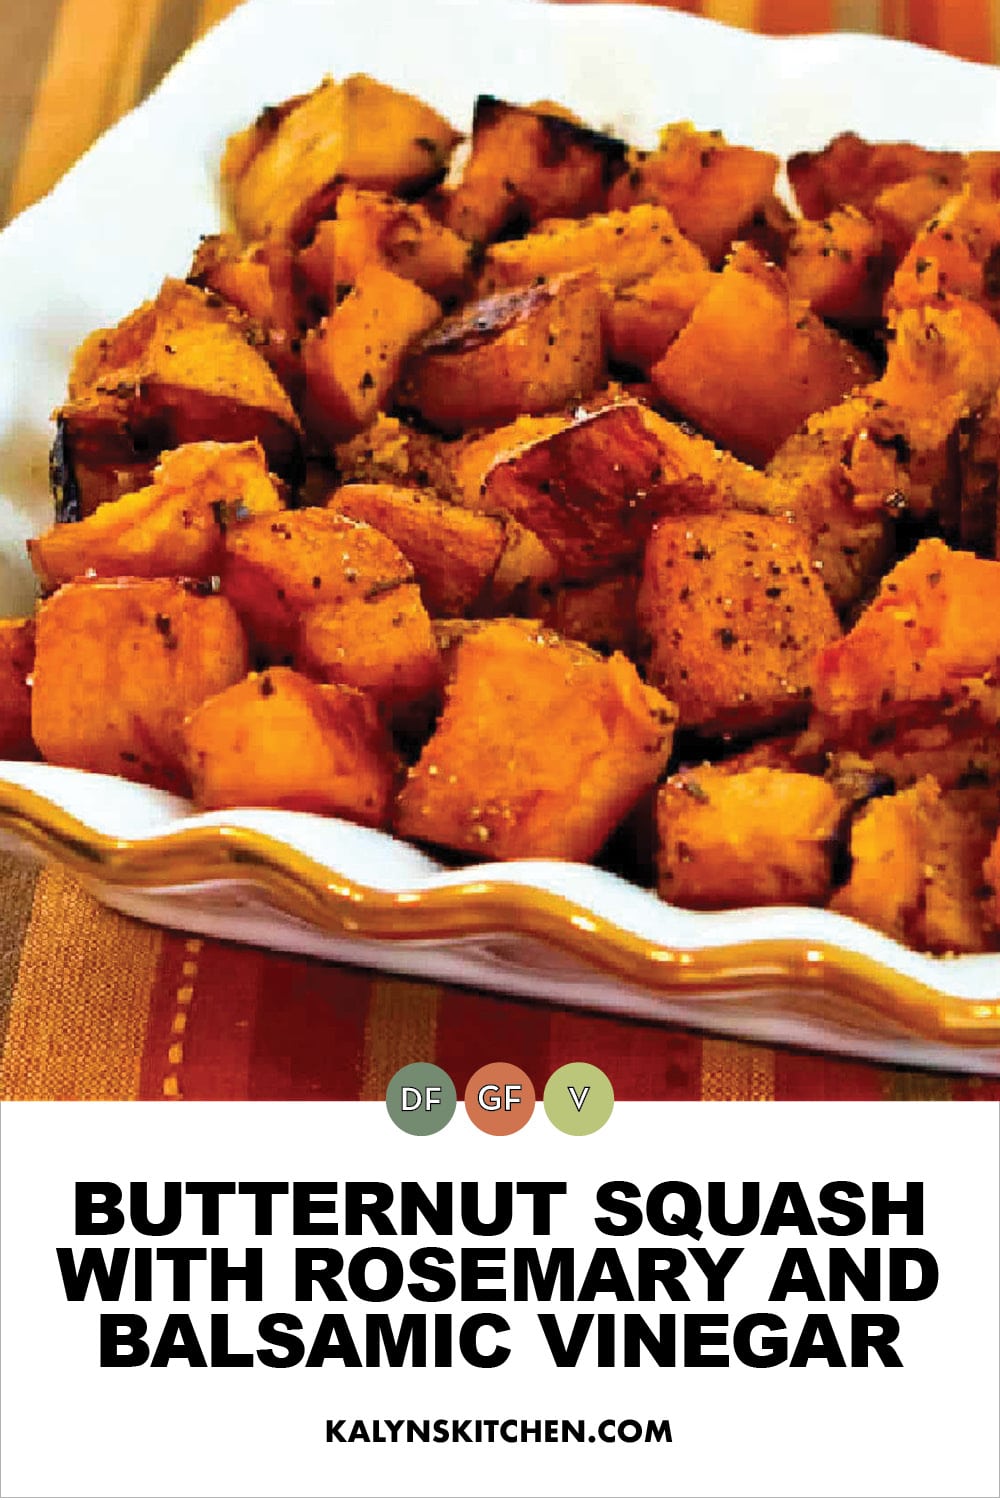 Pinterest image of Butternut Squash with Rosemary and Balsamic Vinegar